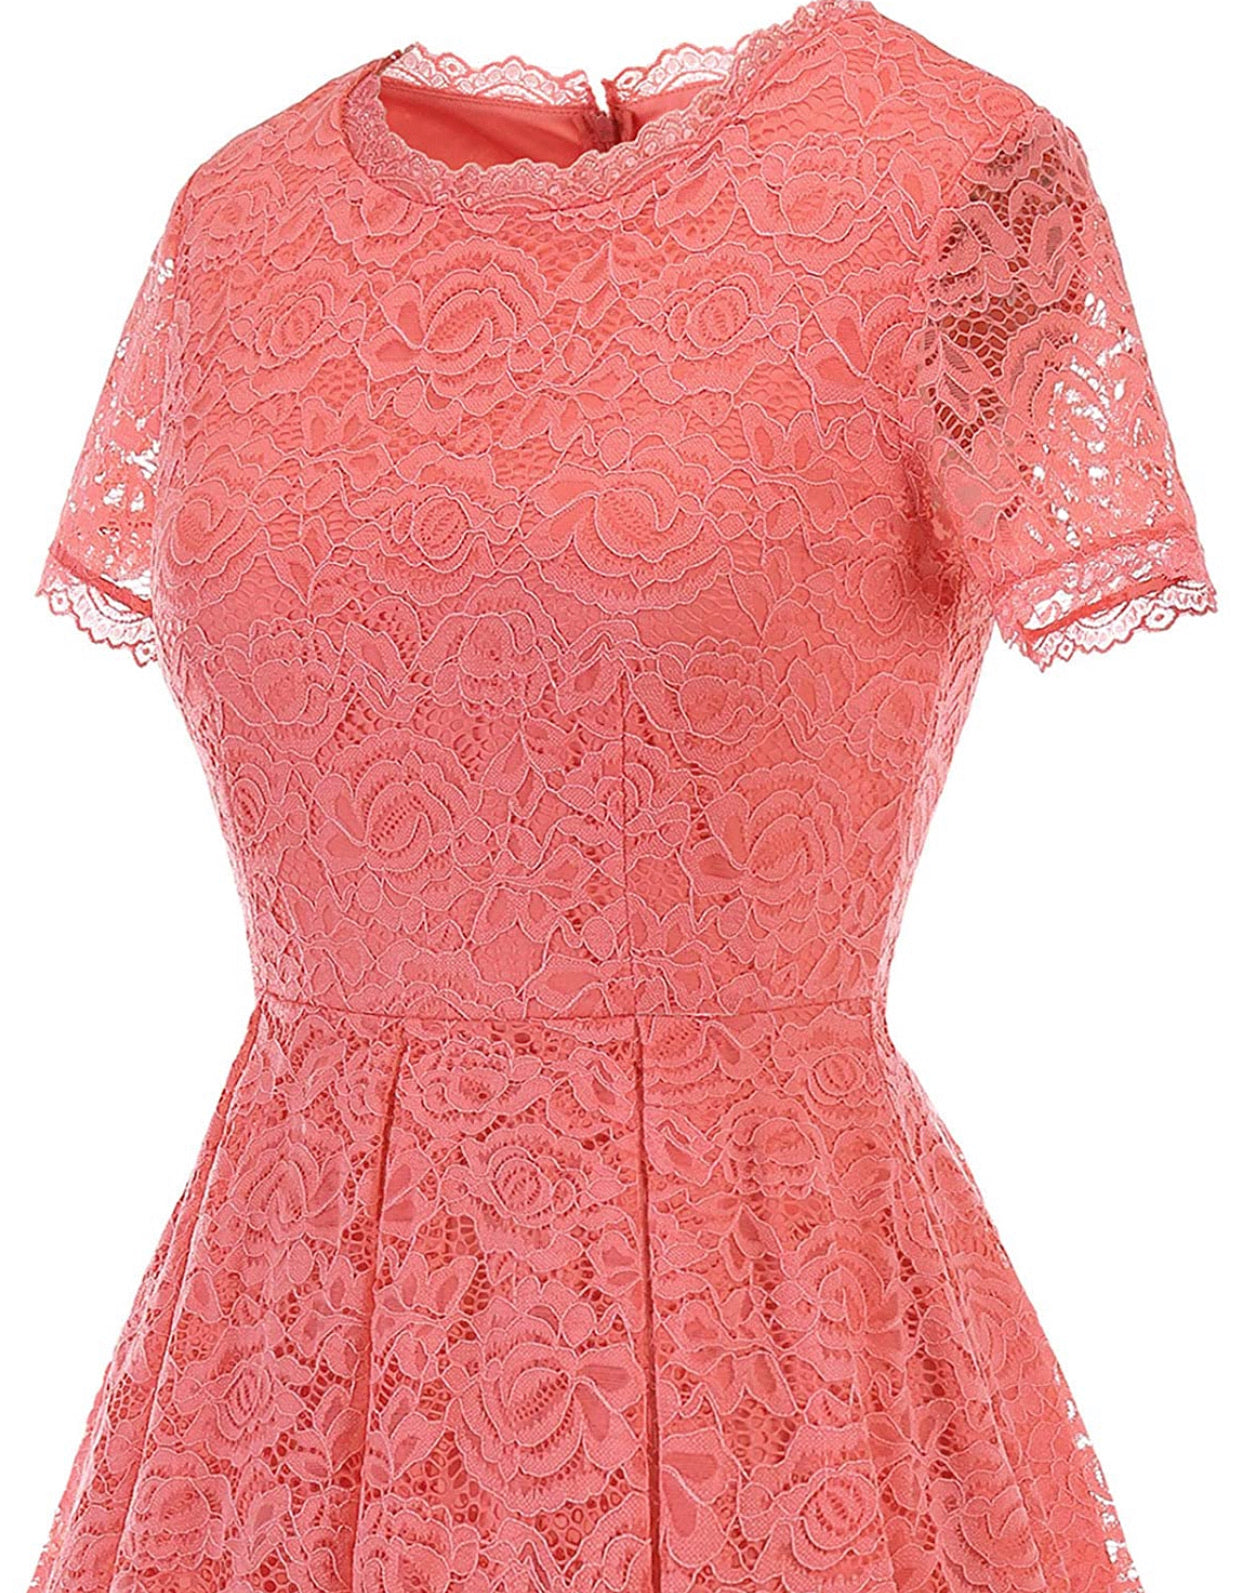 Elegant Lace Bridesmaid Dress, Sizes Small to 3XLarge (Coral)